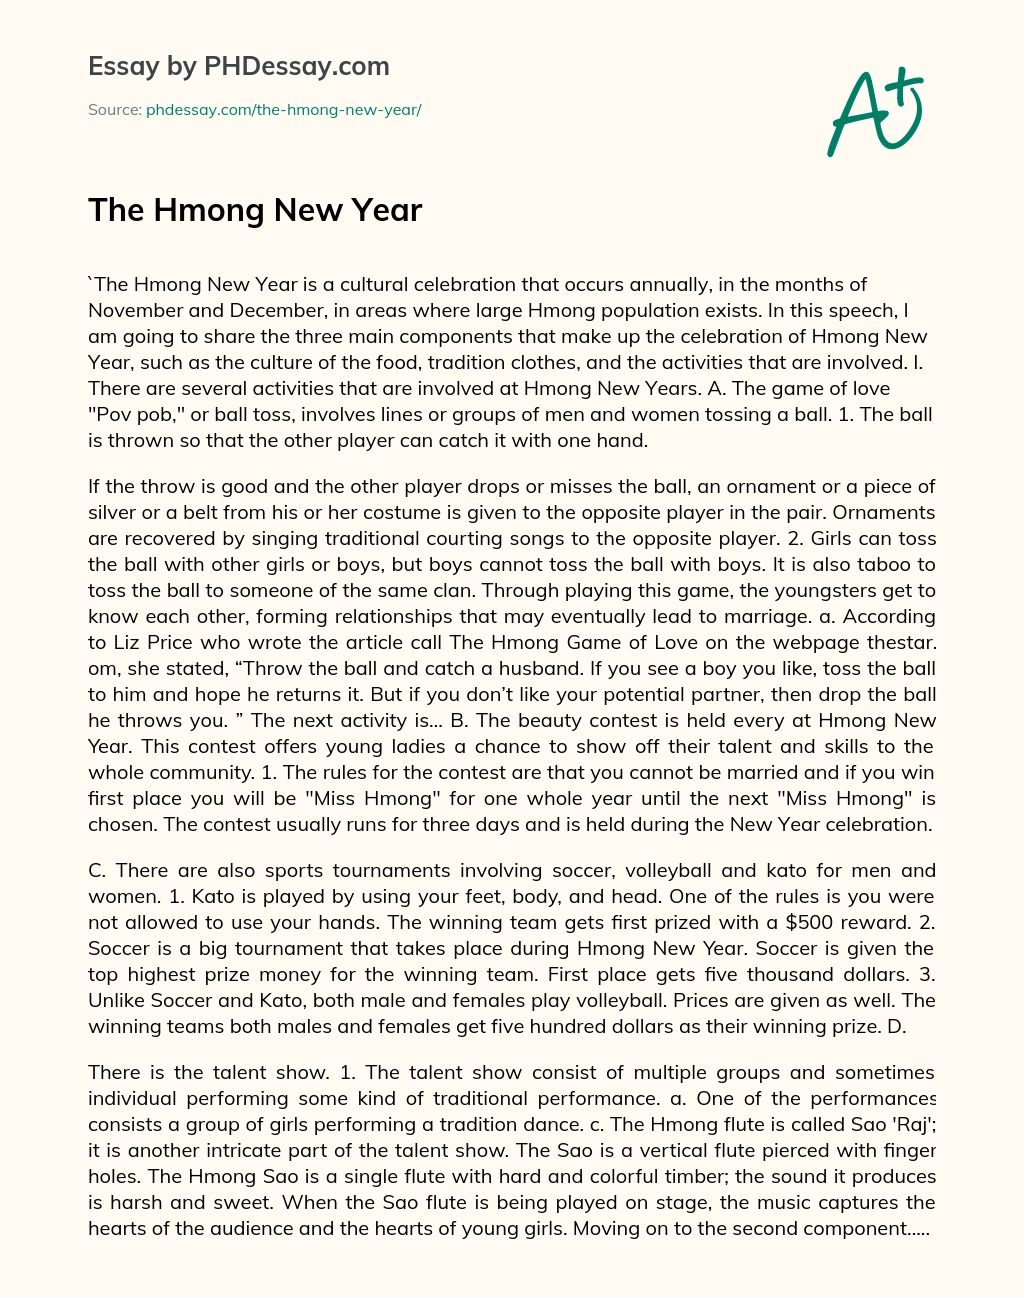 The Hmong New Year essay